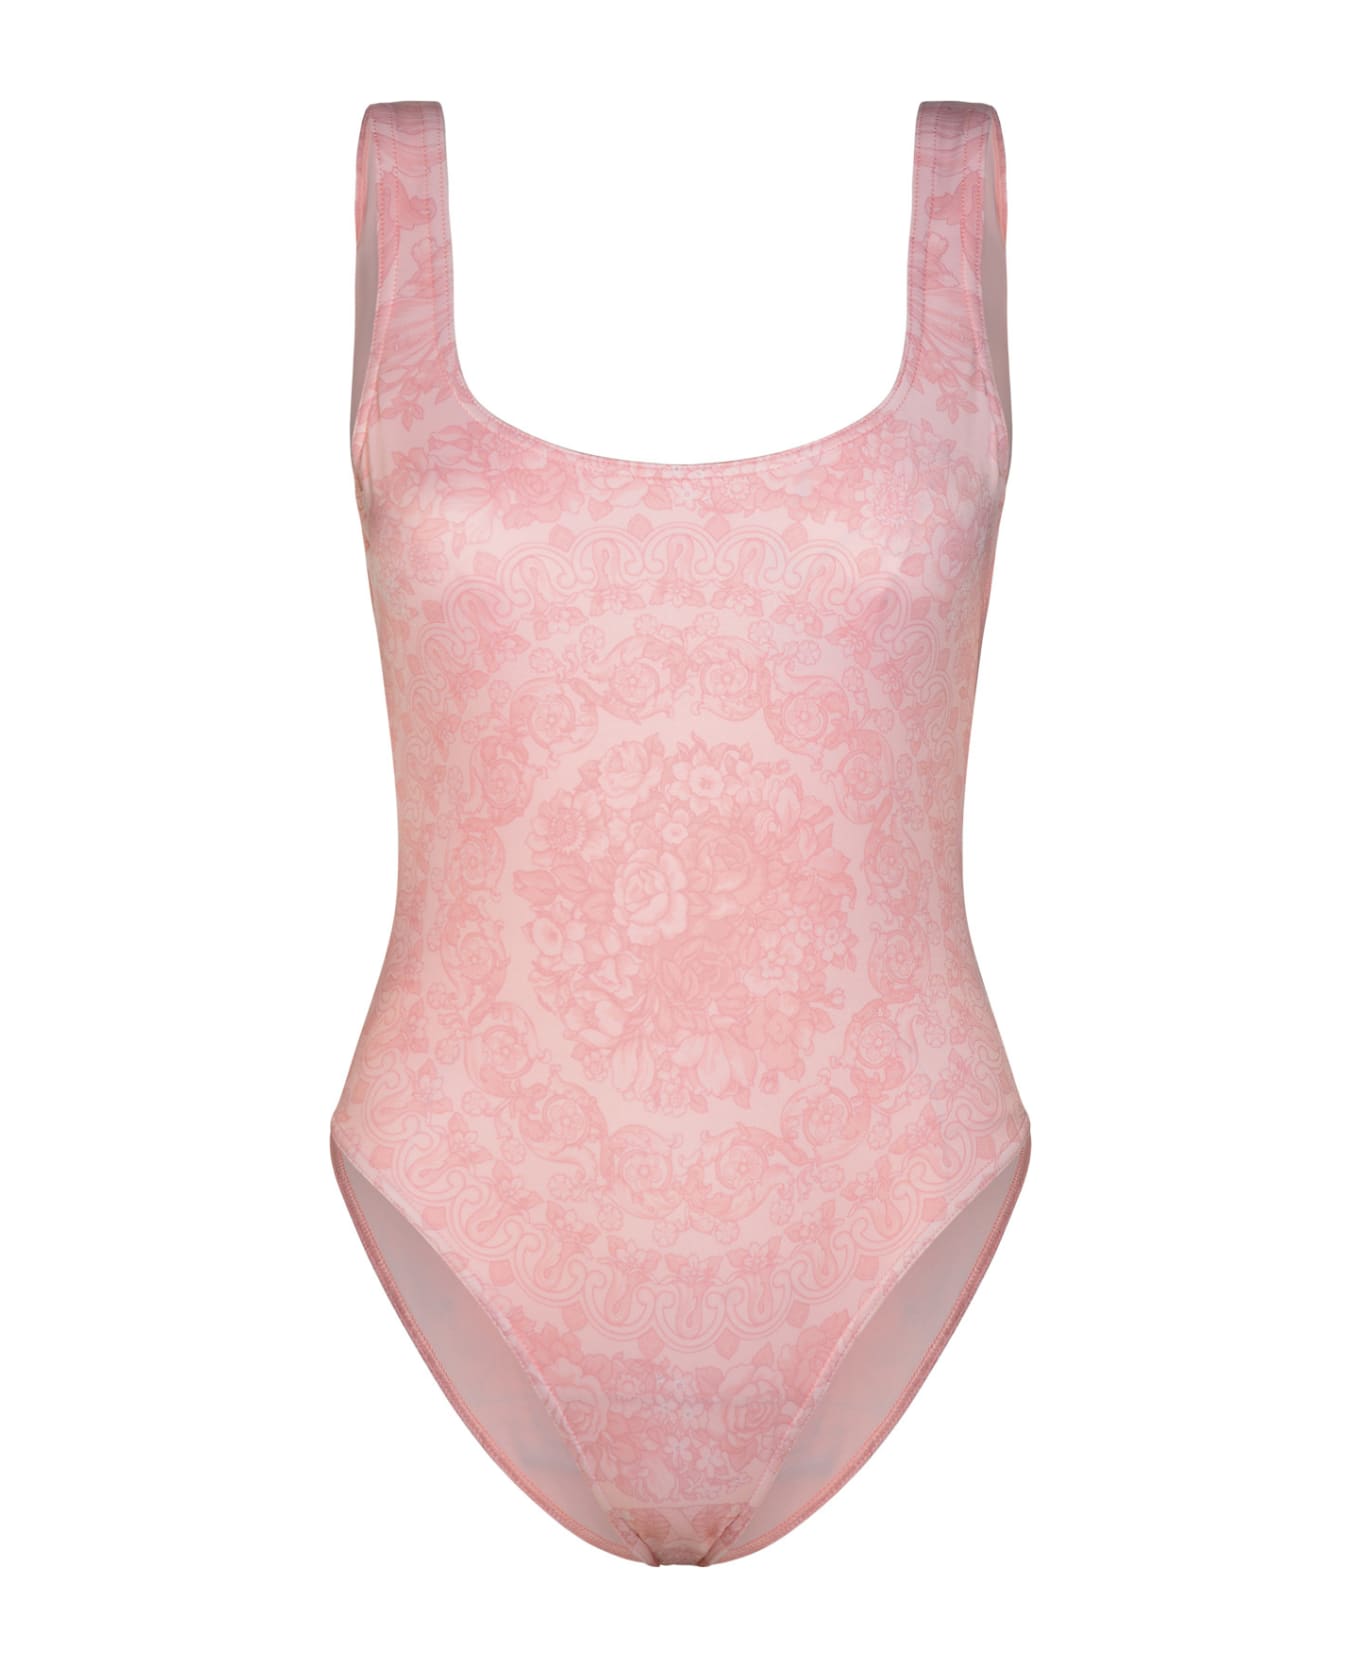 Versace 'barocco' One-piece Swimsuit In Pink Polyester Blend - Pink ビキニ